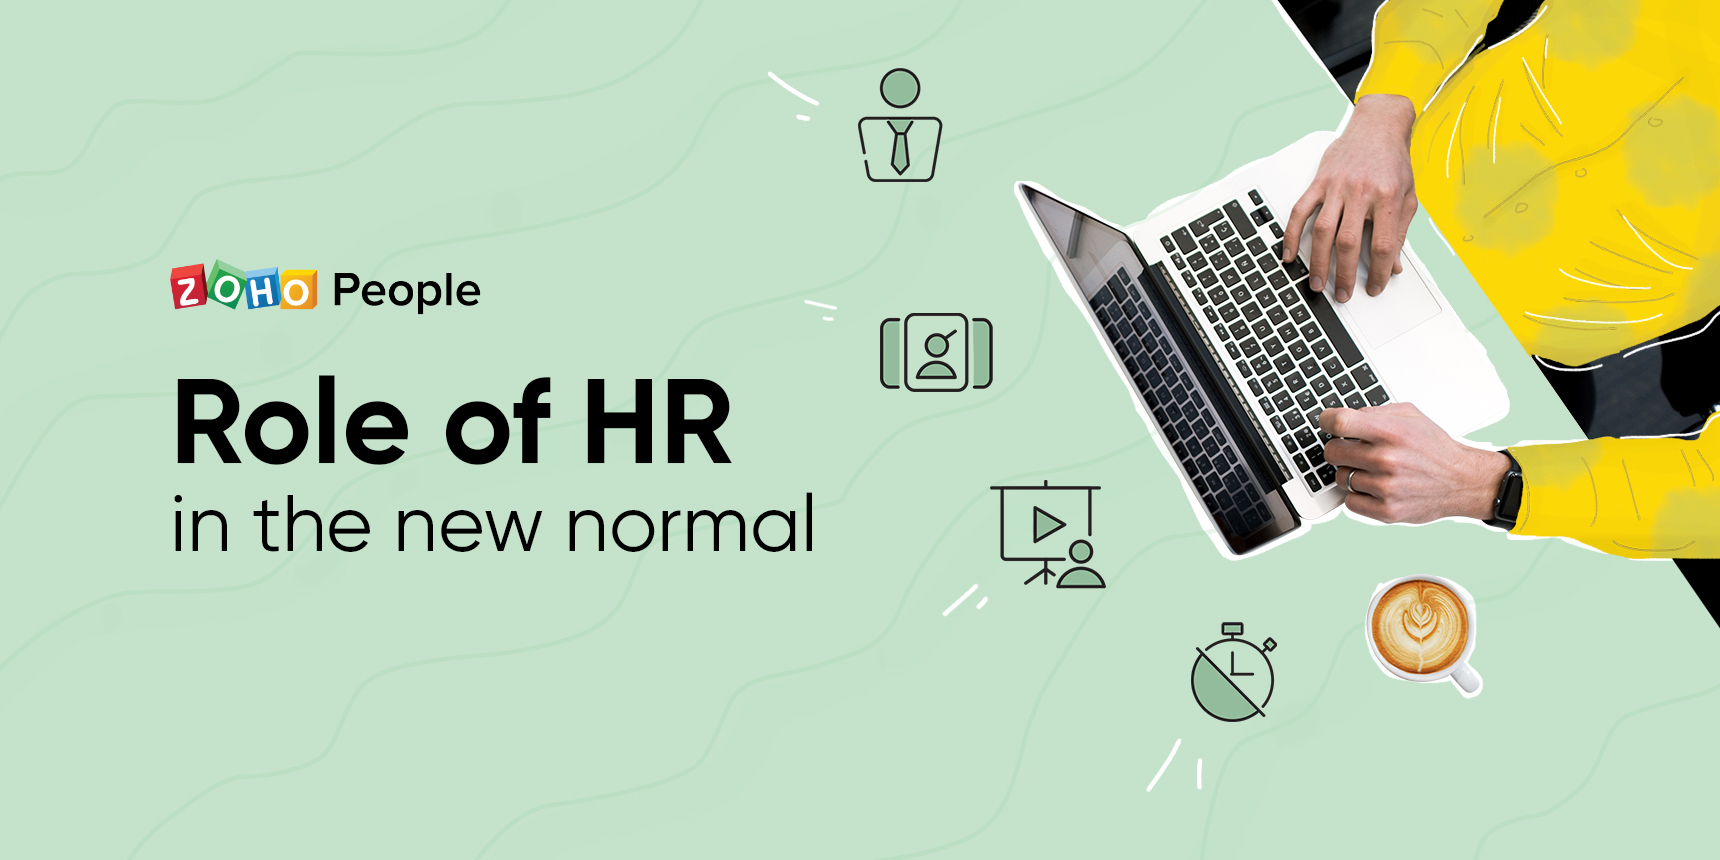 How to better manage employees during the new normal